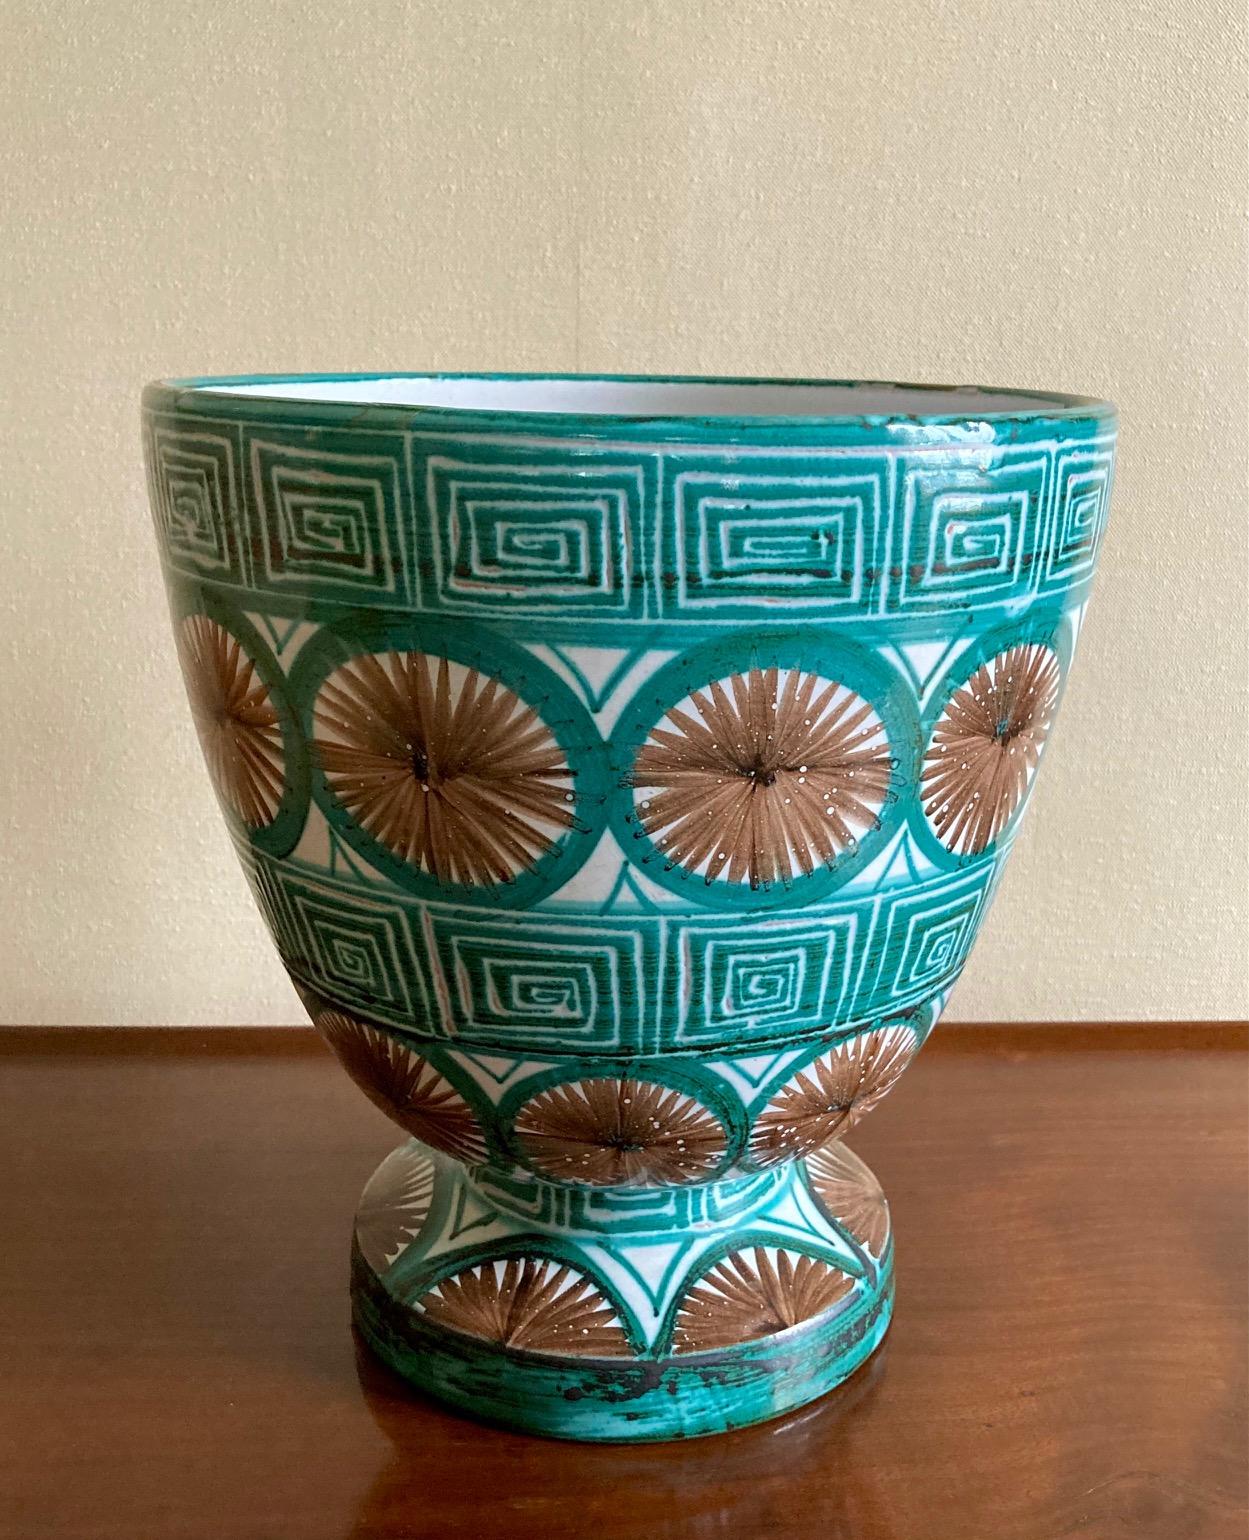 Decorative ceramic vase by Robert Picault. 
Geometric pattern in white, green and brown glazes.
Signed under the base 